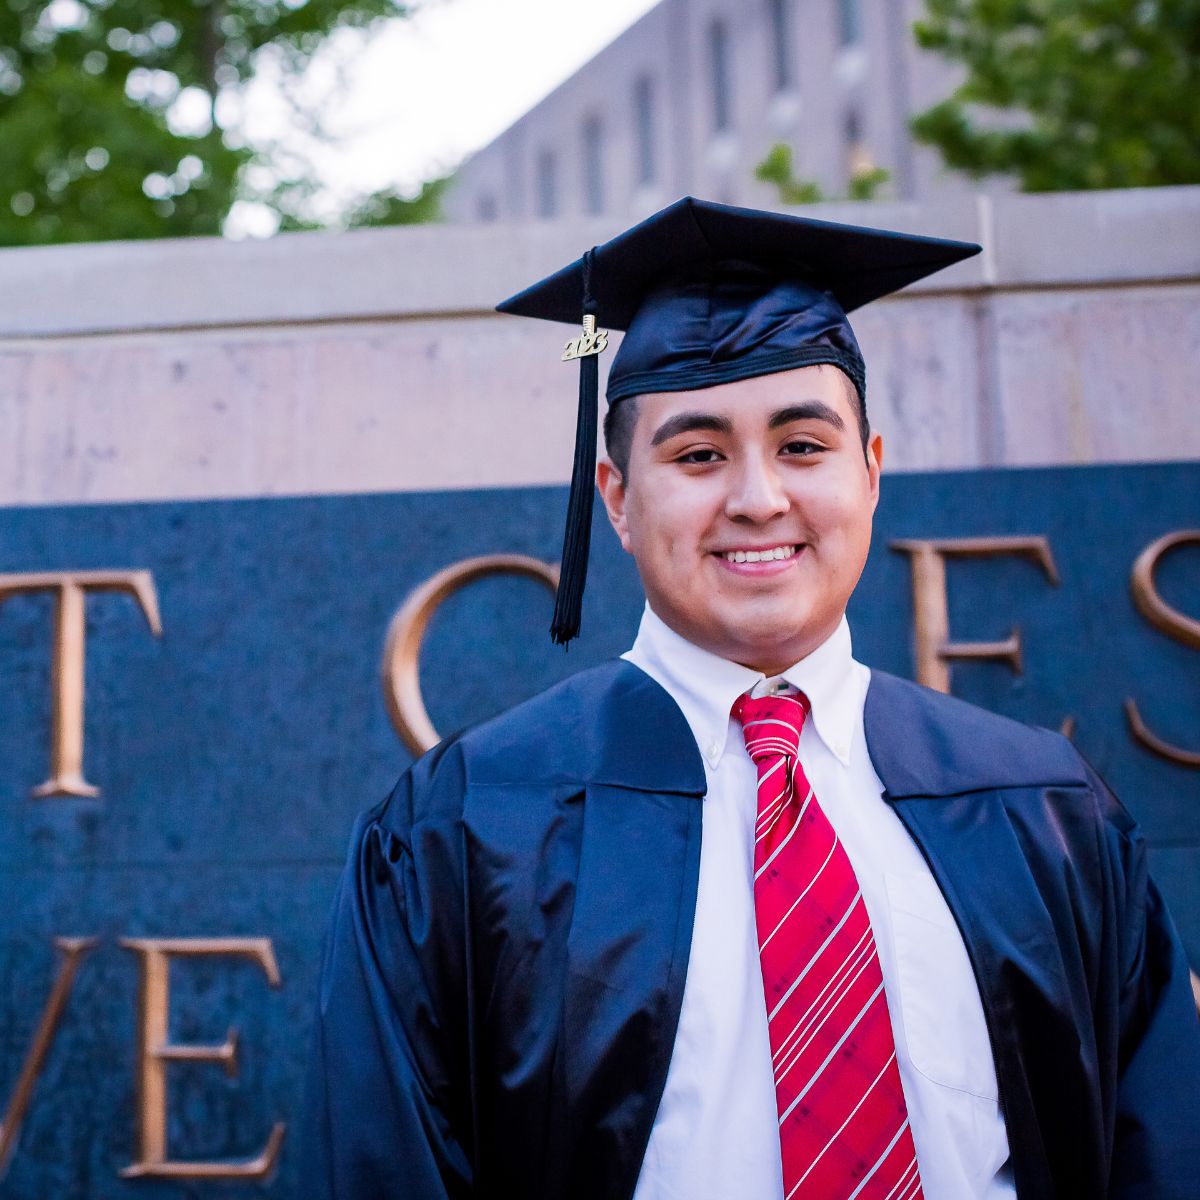 Will-West Chester University Graduate | West Chester, Pa